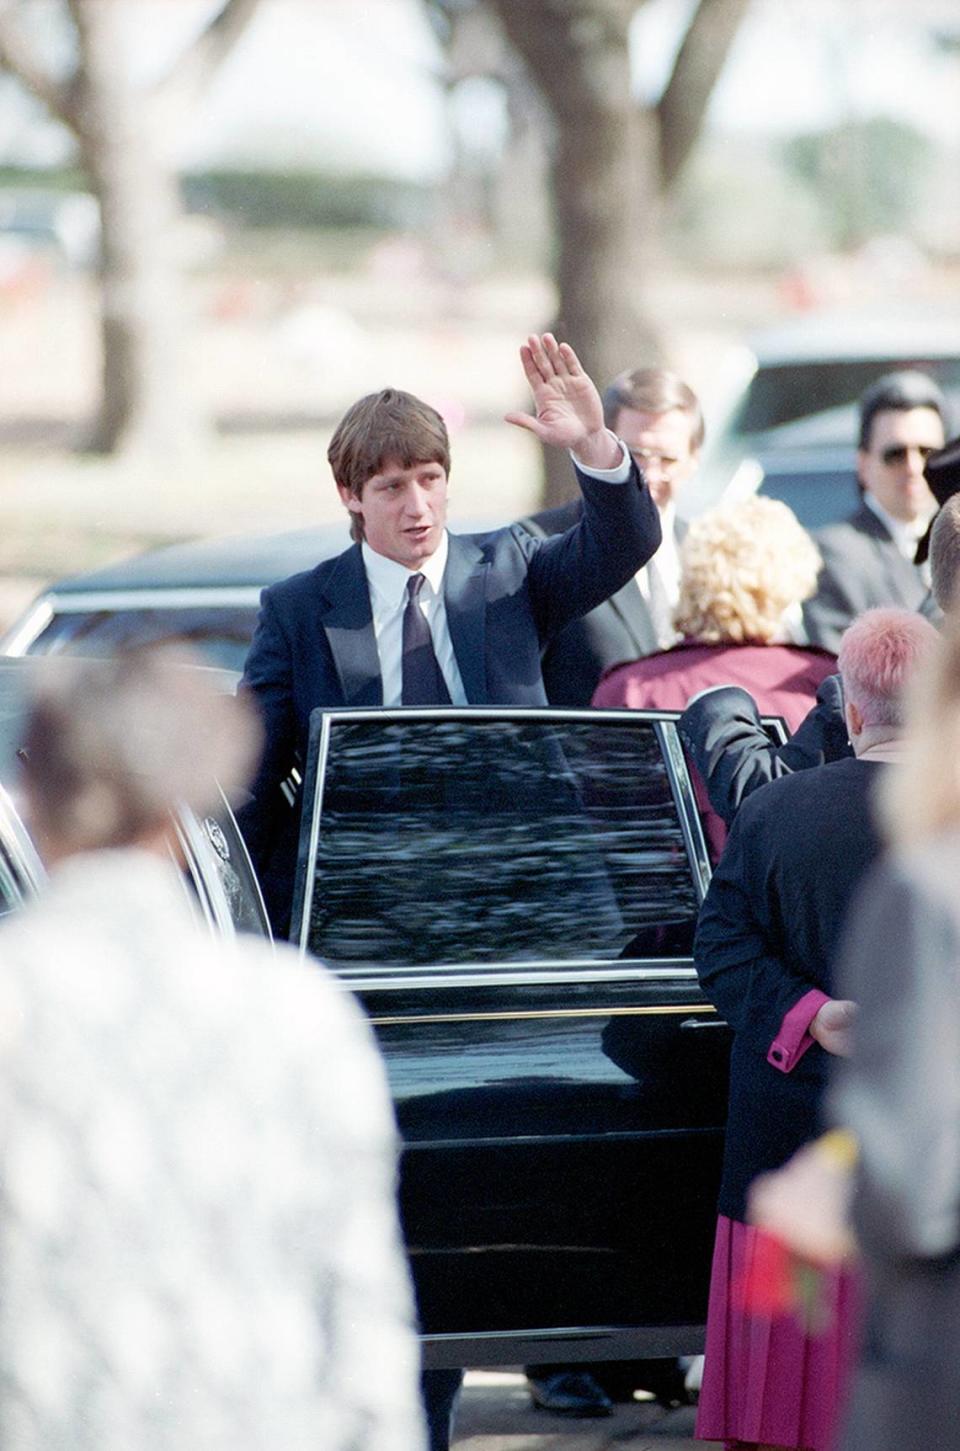 February 22, 1993: Wrestler Kerry Von Erich’s funeral held at First Baptist Church in Dallas. His brother, Kevin Von Erich, waves as he leaves the graveside ceremony at Grove Hill Cemetery in Dallas.